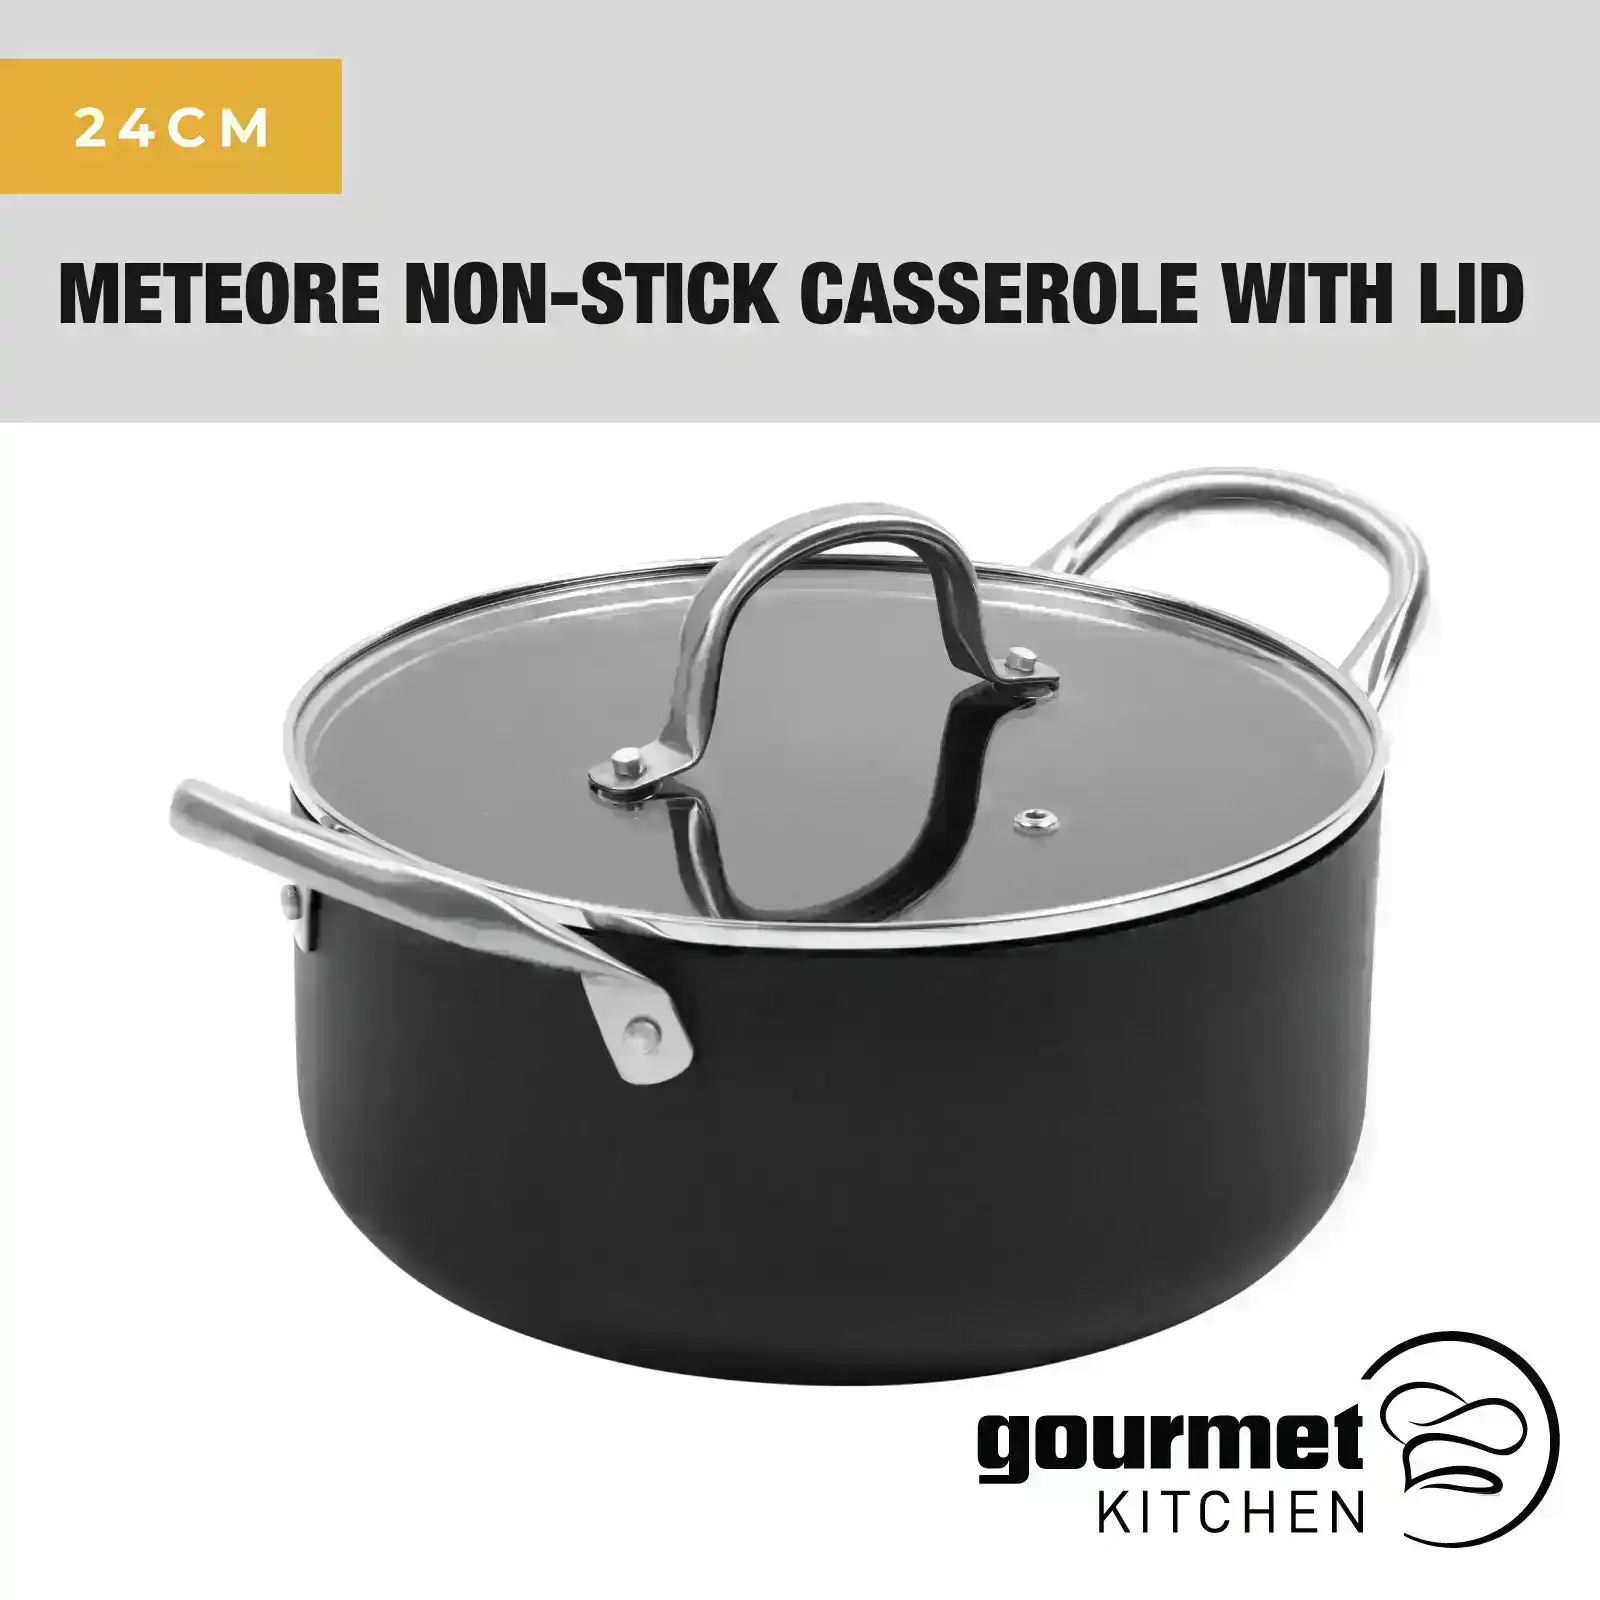 Gourmet Kitchen Meteore Non-Stick Casserole with Flat Lid 24cm